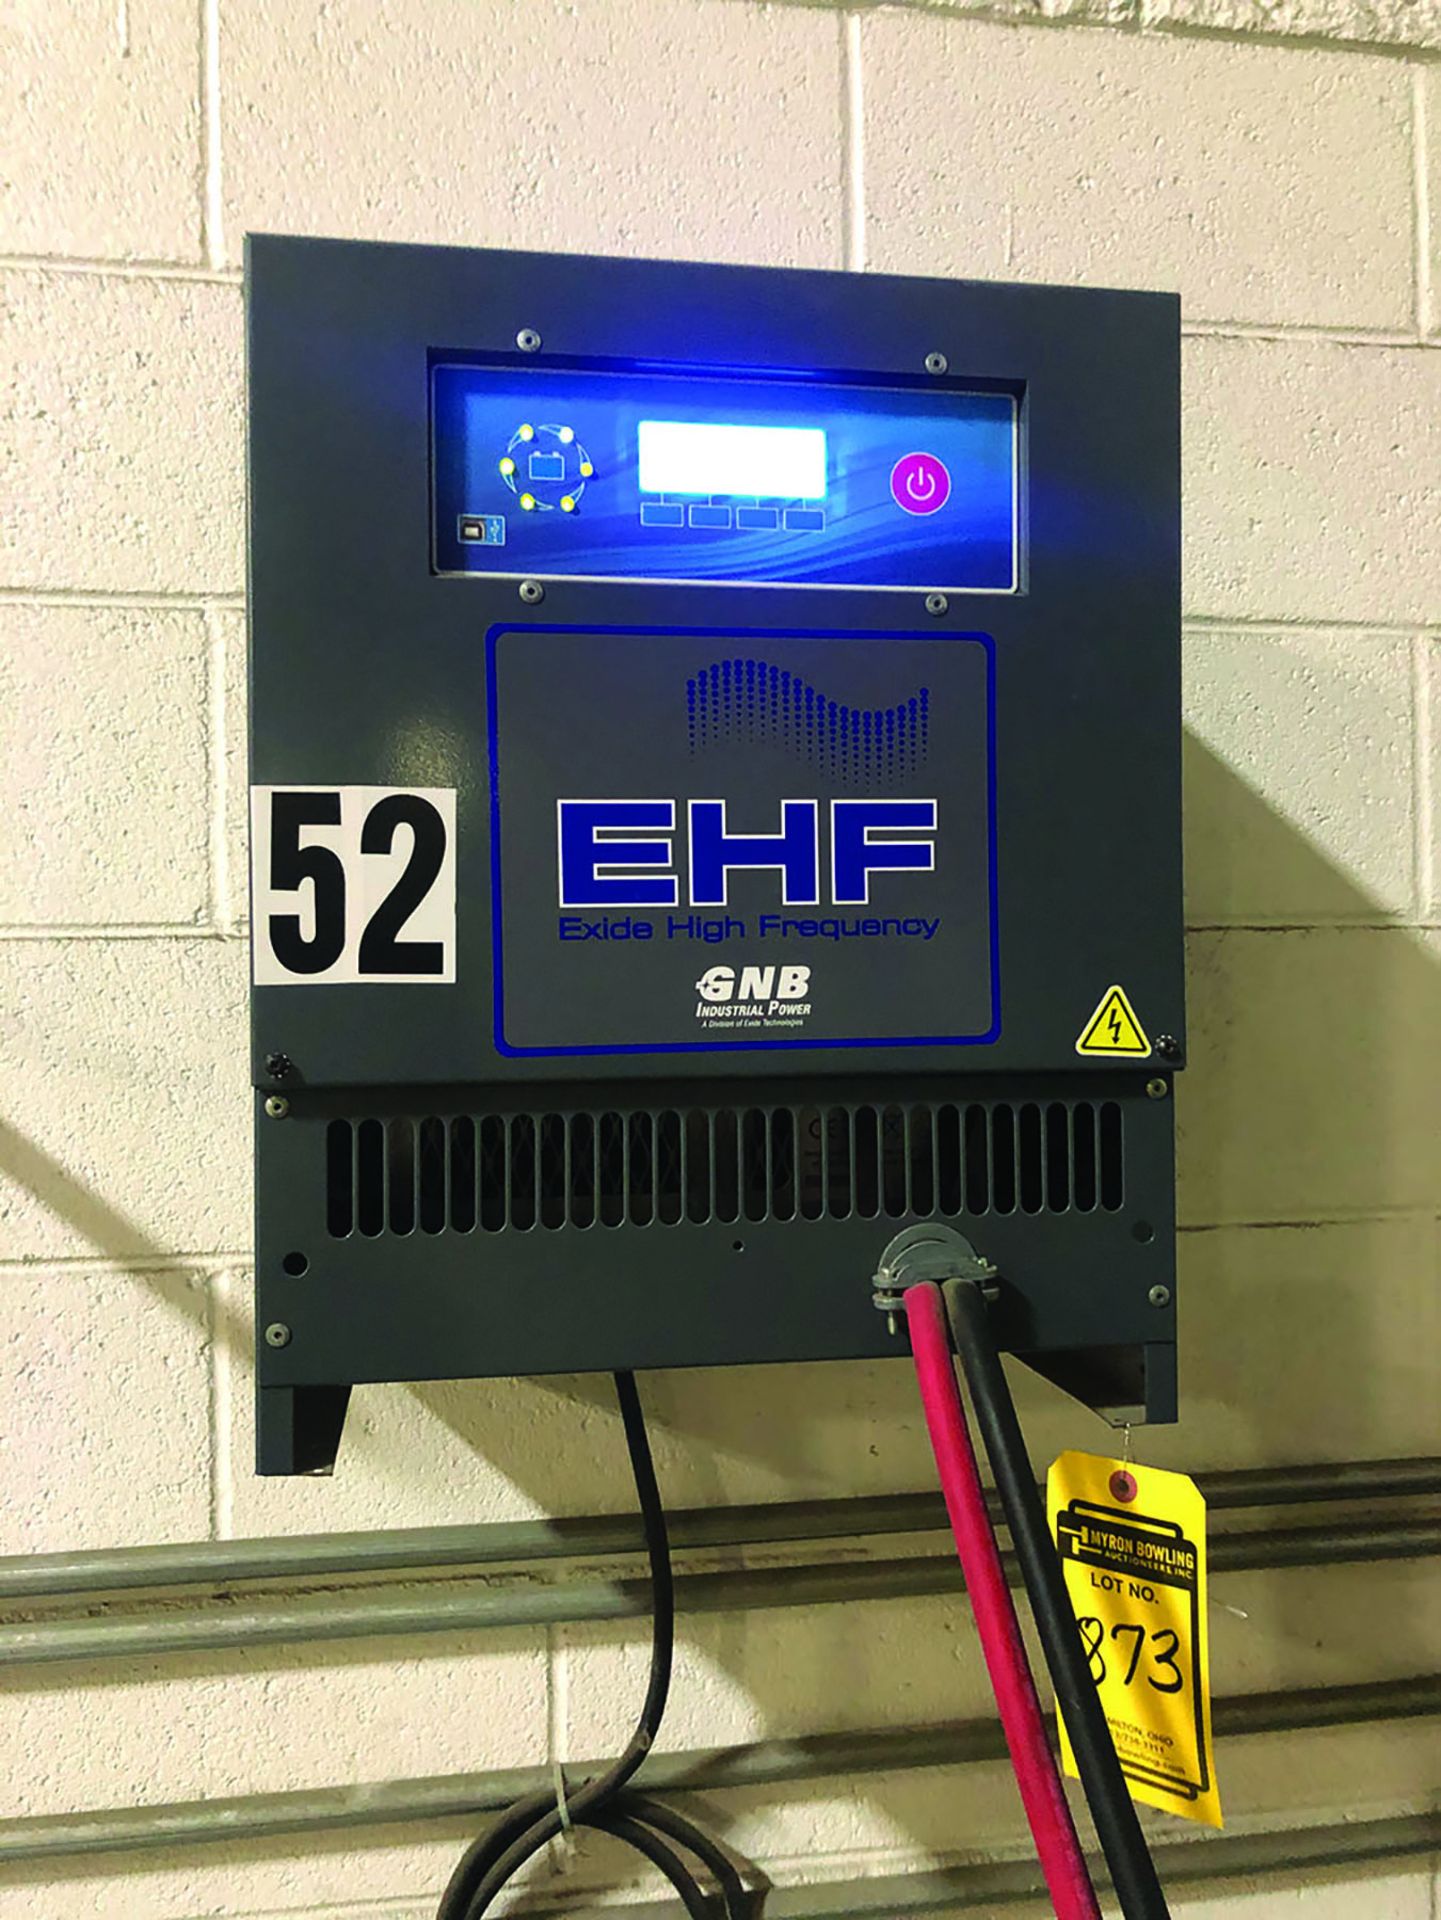 INDUSTRIAL BATTERY CHARGER EXIDE HIGH FREQUENCY, MODEL # EHF242130M, S/N- LMRHF0083, 12 CELL, 3